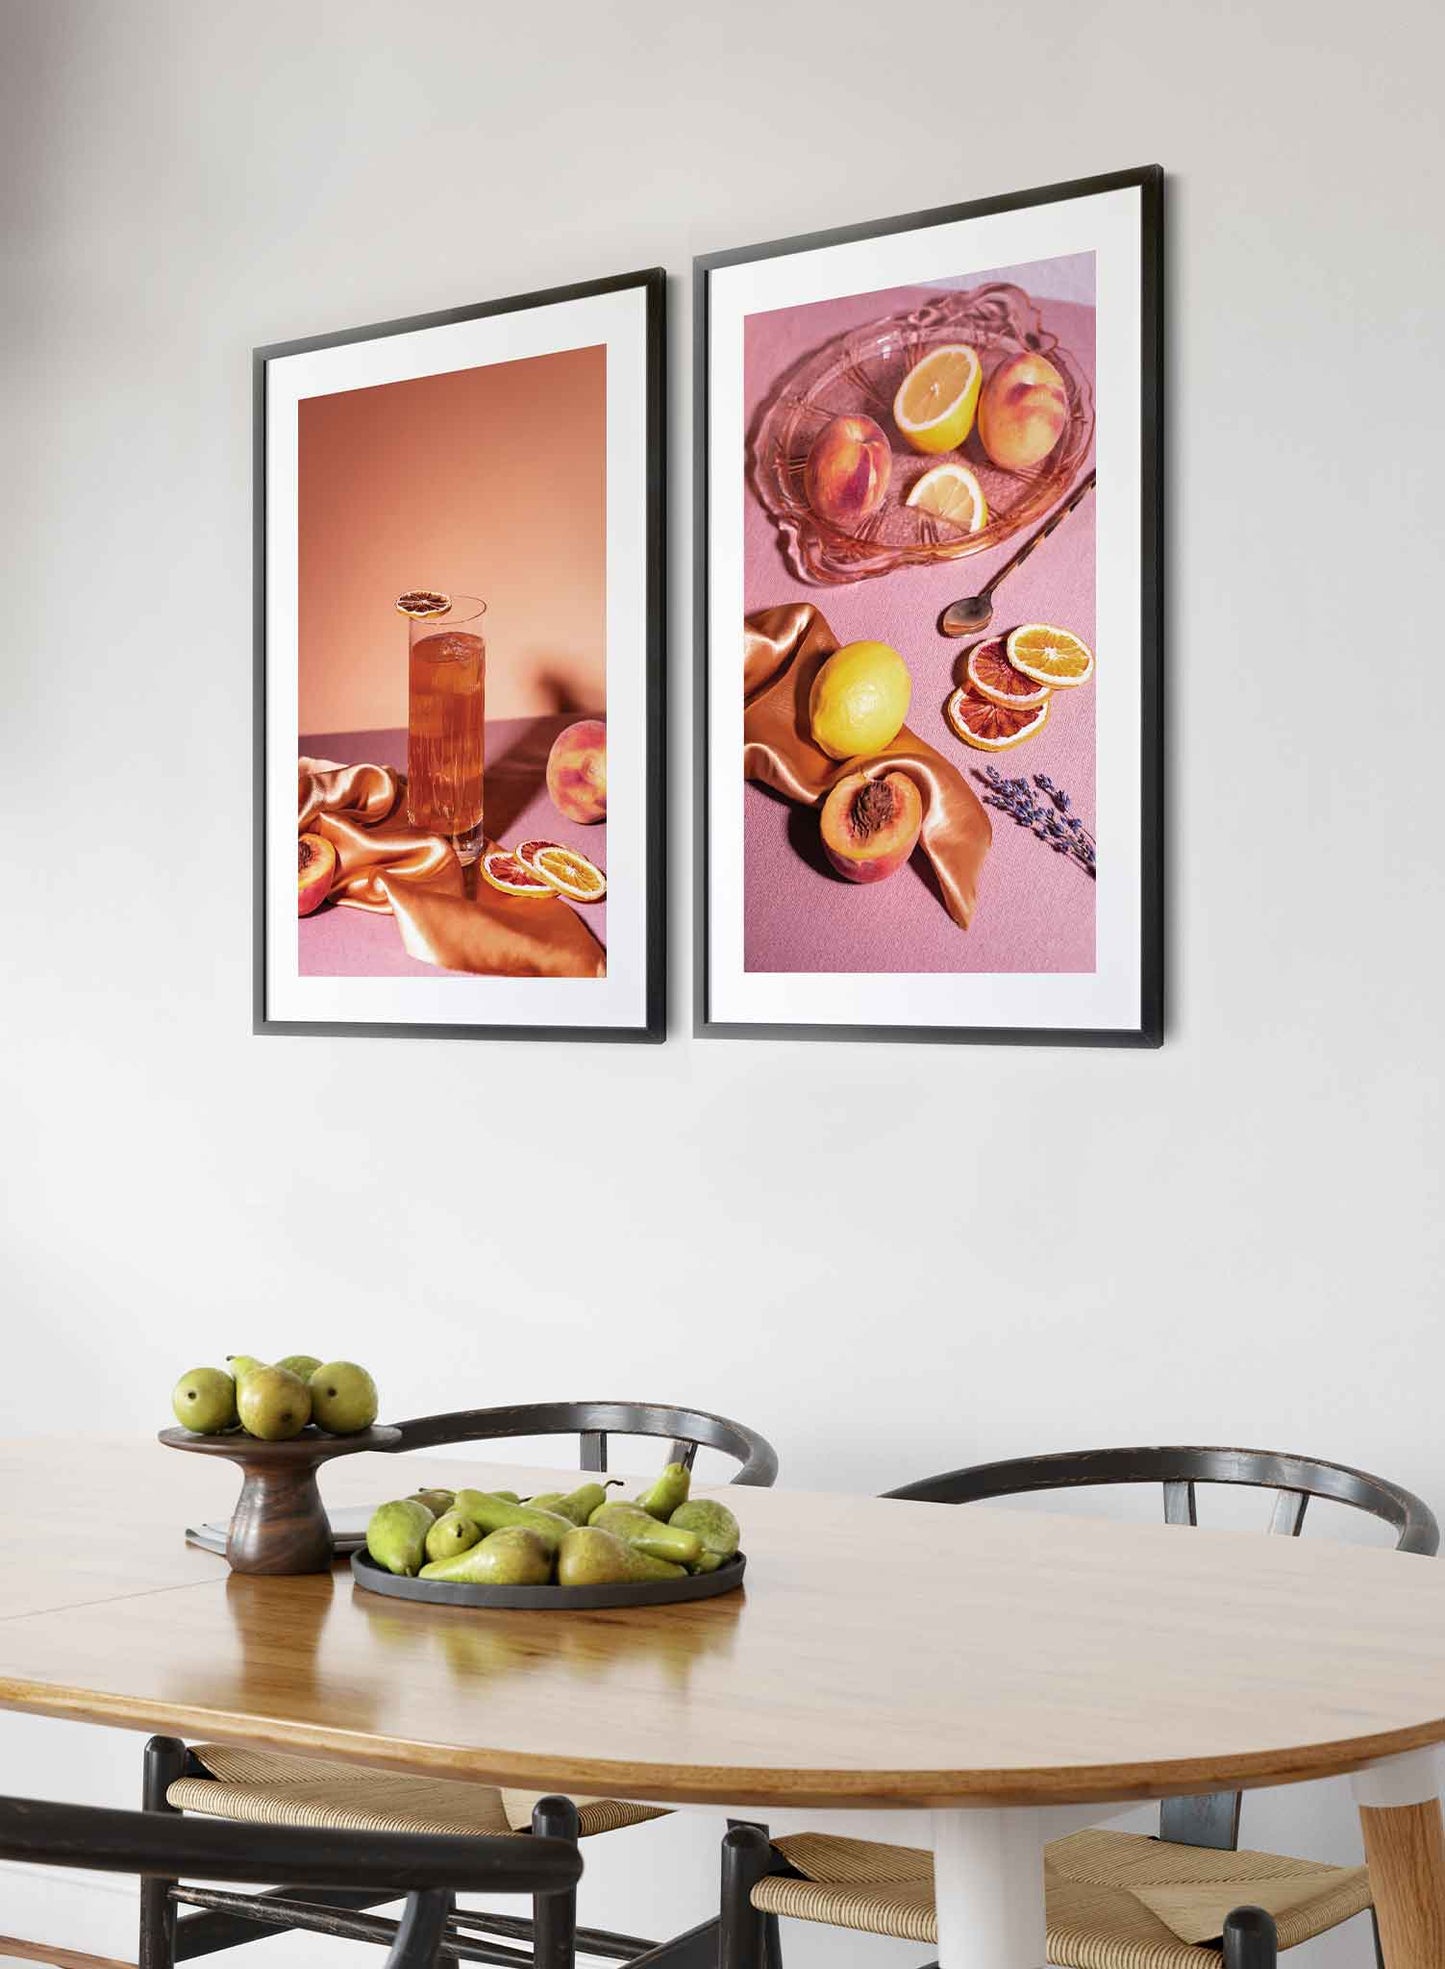 Sunny Flavours is a colourful fruit photography poster by Opposite Wall.